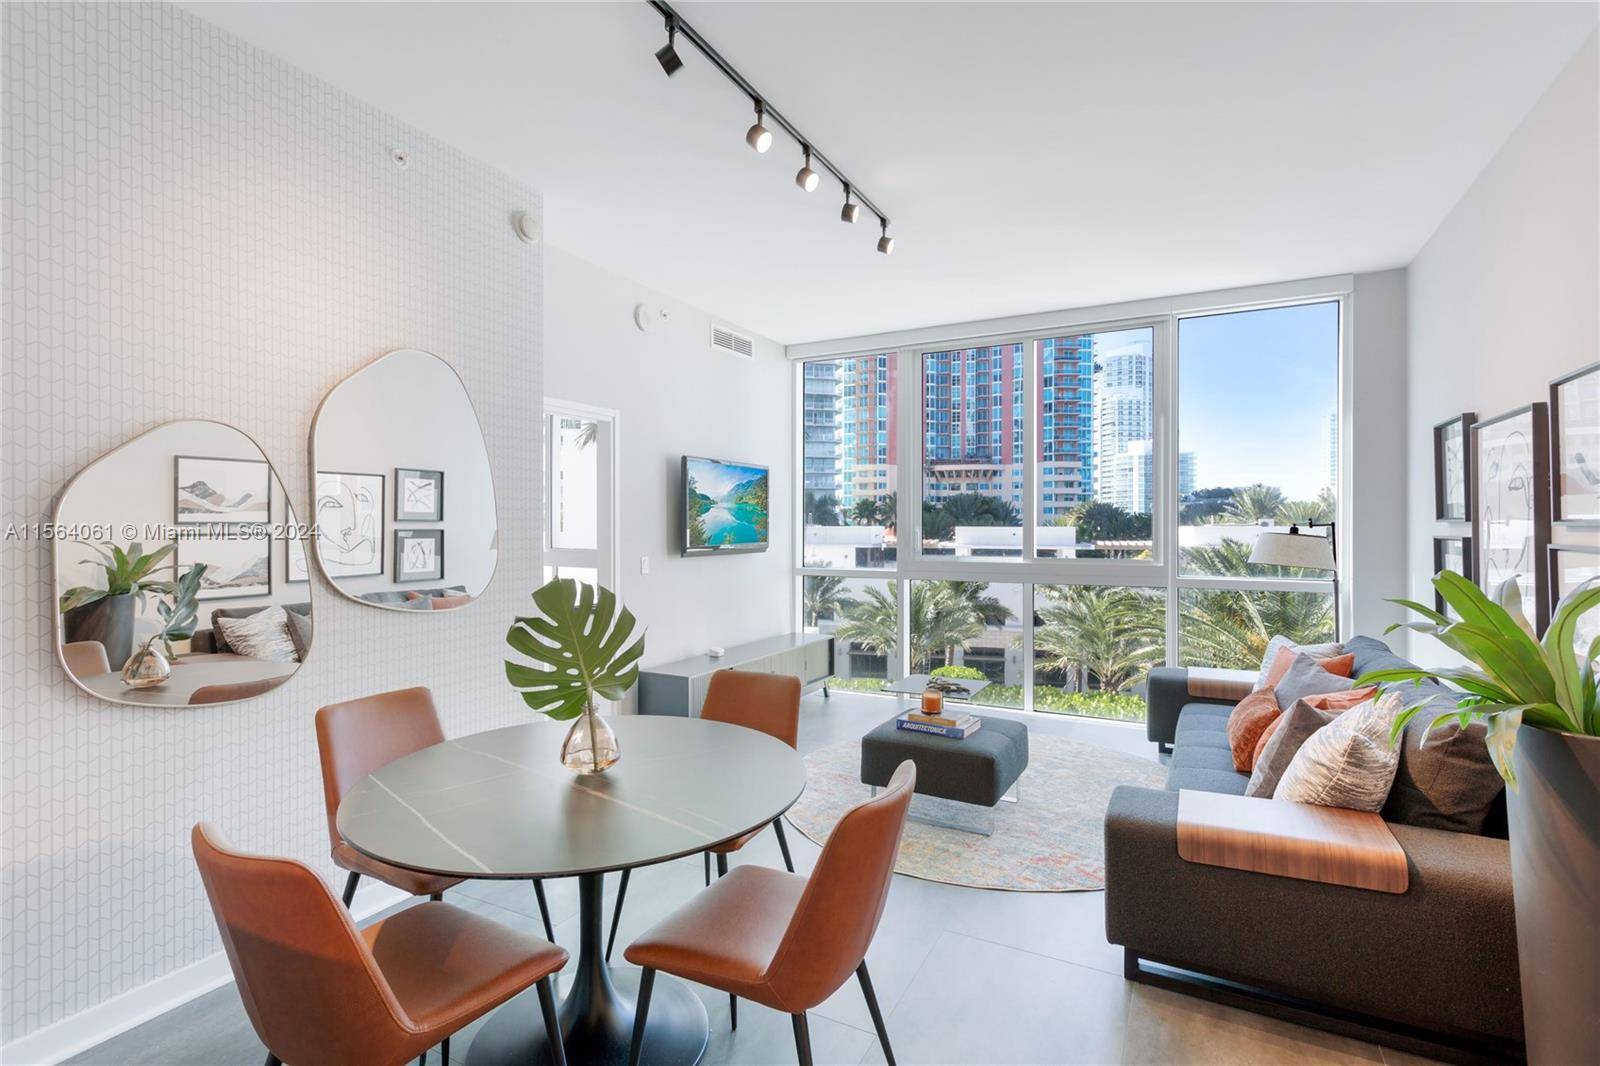 All Renovated and fully furnished one bedroom, one full bath residence at Continuum North Tower, located in South of Fifth, the most exclusive area in South Beach.